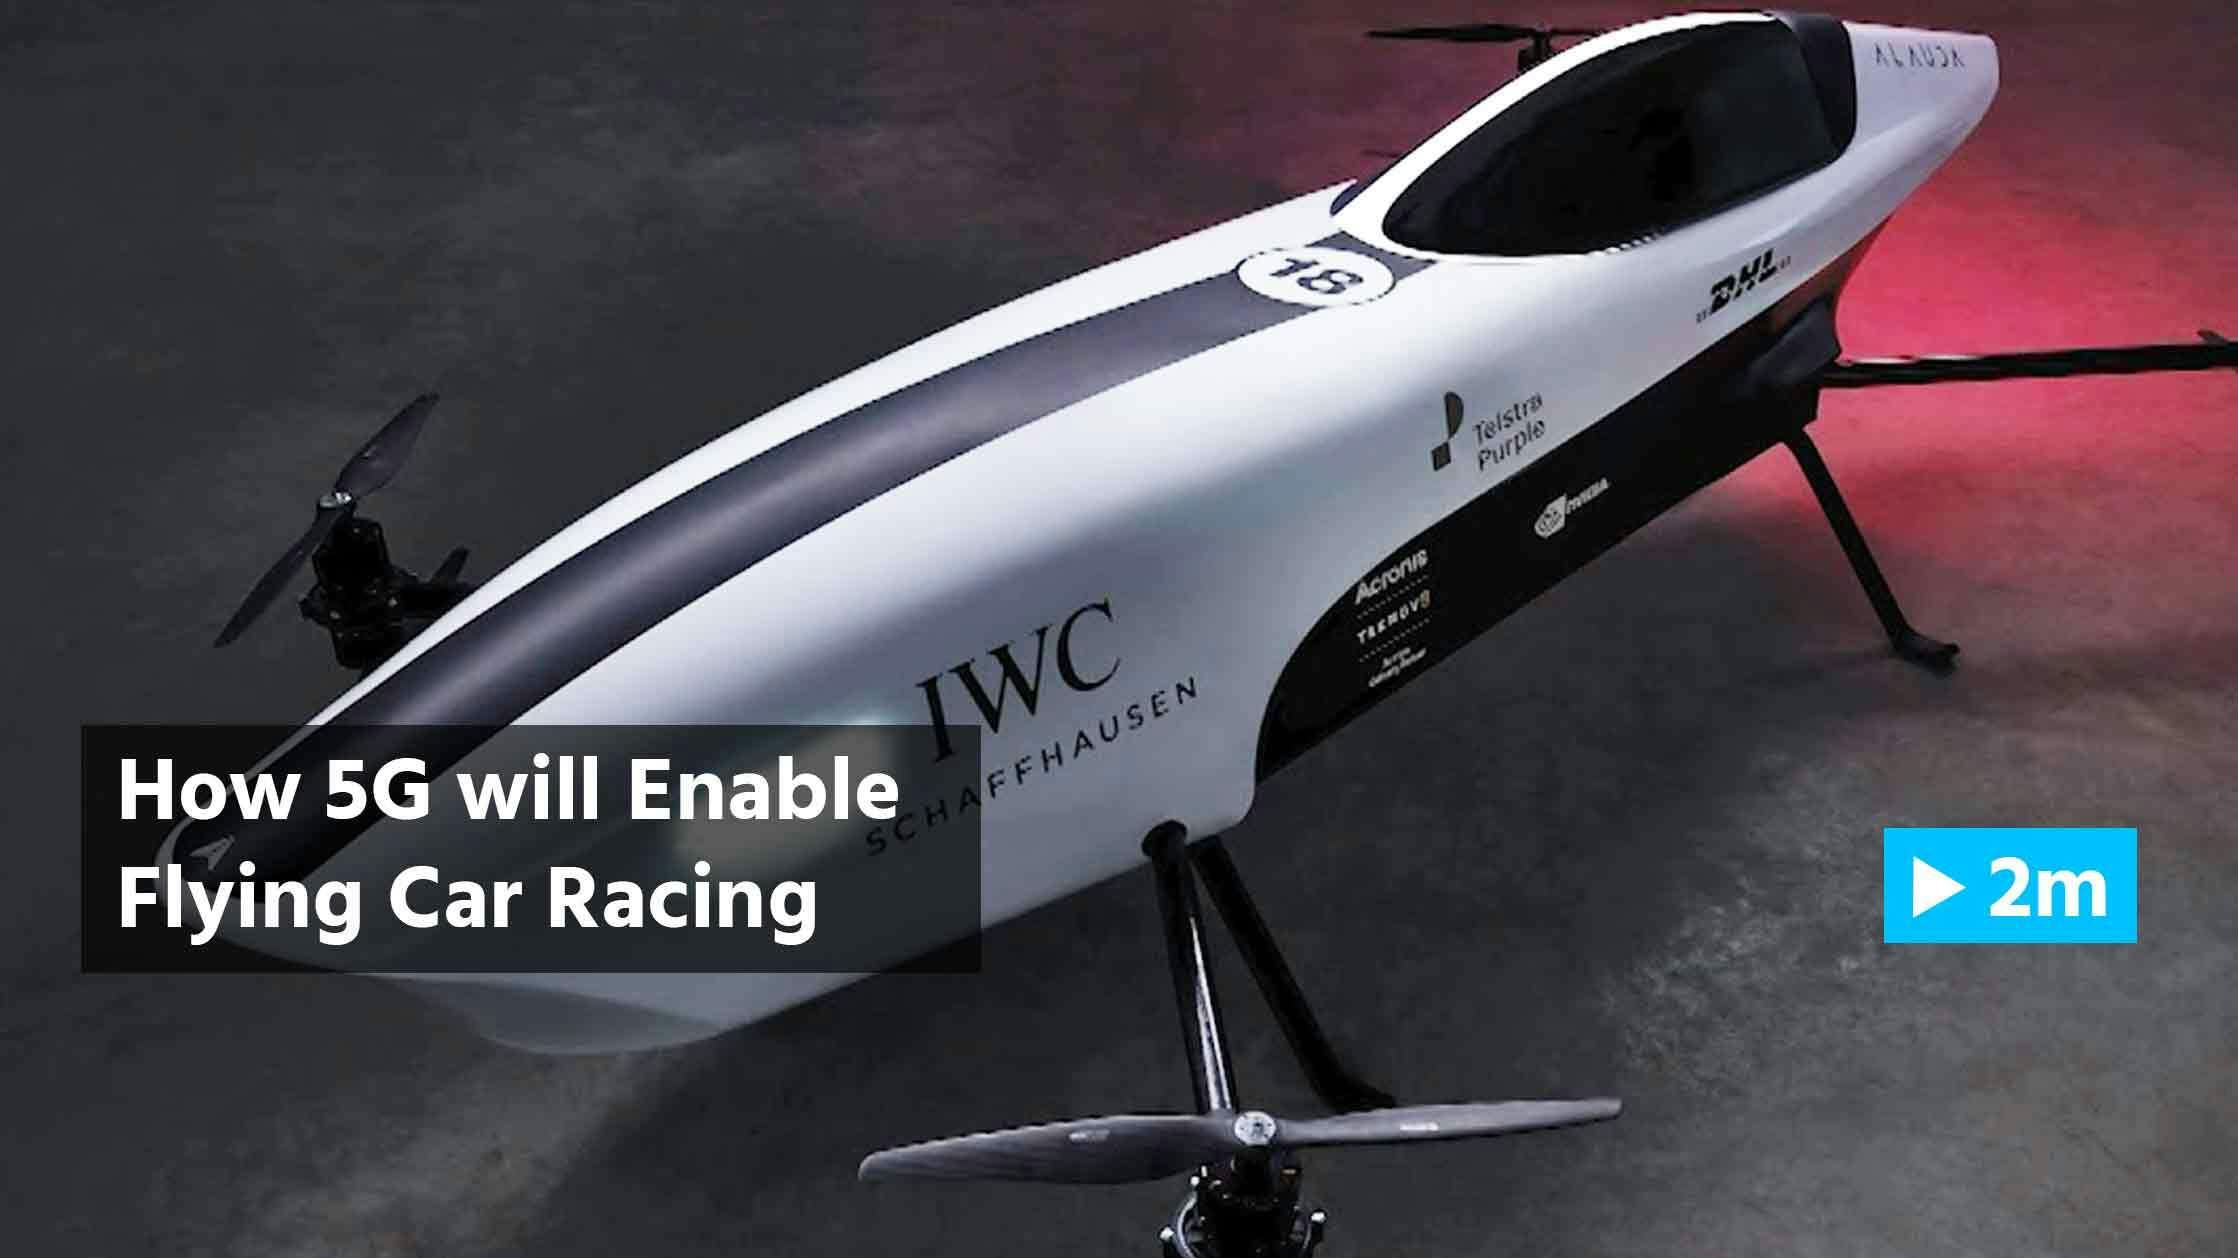 Reuters Report: How 5G will enable flying car racing